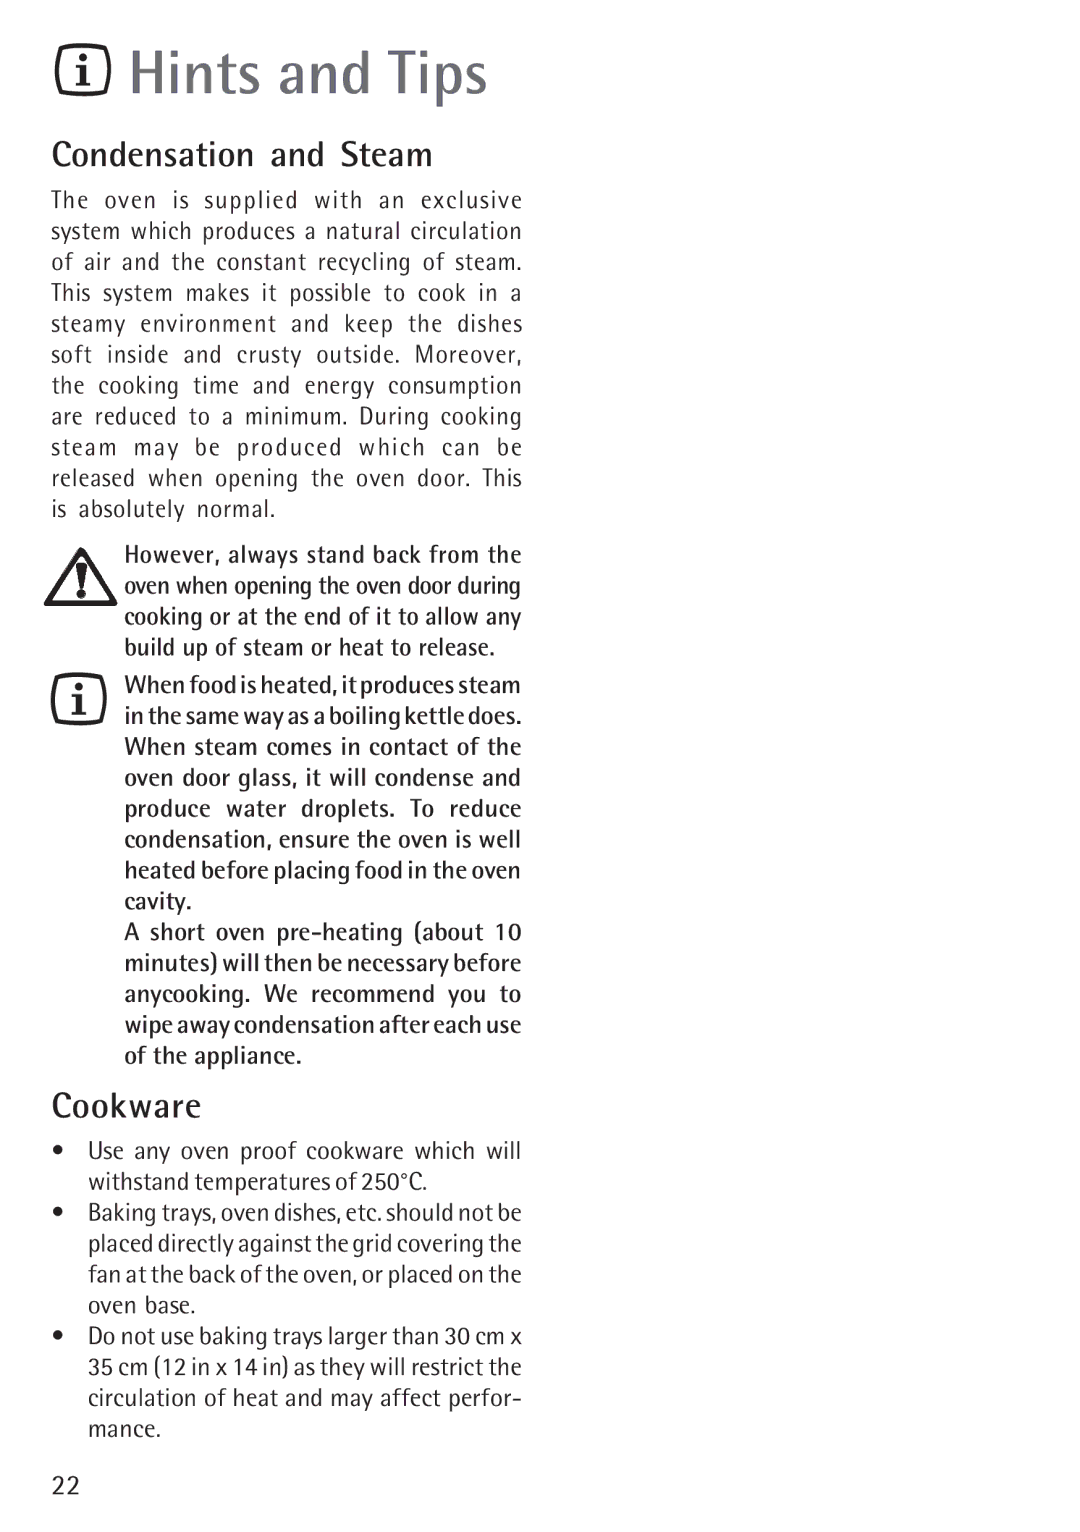 Electrolux B 89092-4 manual Hints and Tips, Condensation and Steam, Cookware 